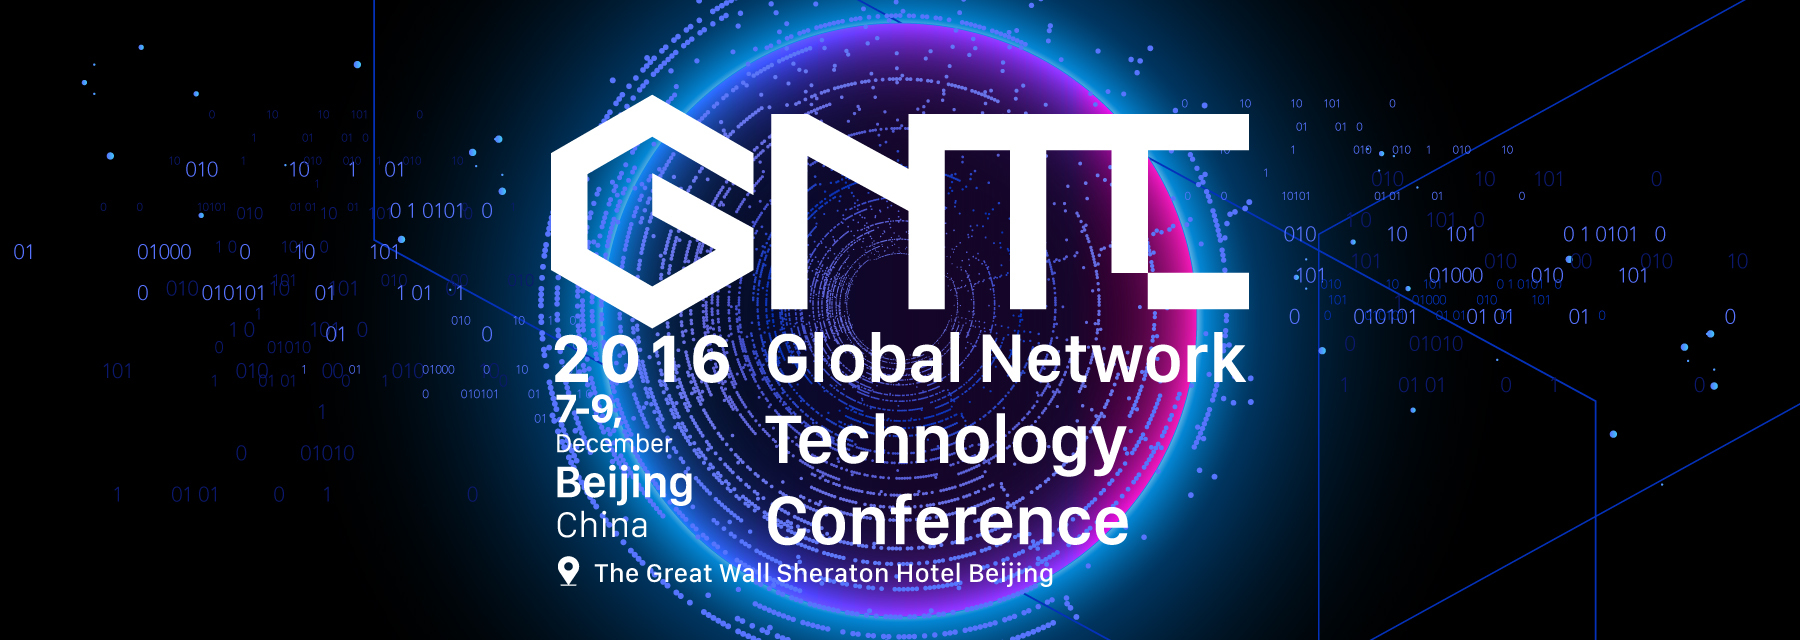 GNTC - Global Network Technology Conference